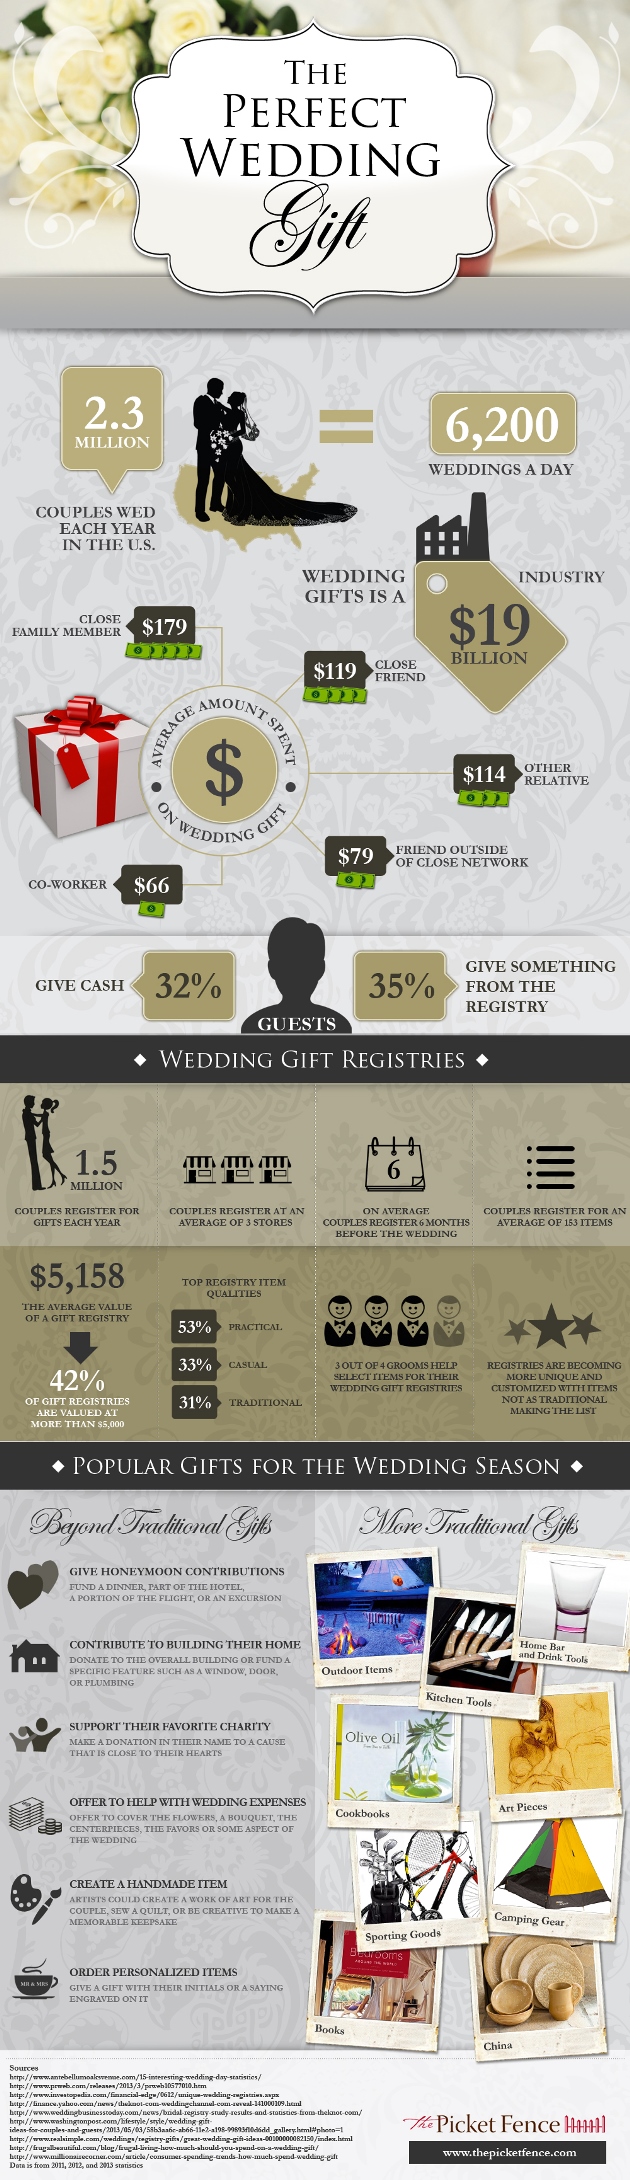 Finding the Perfect Wedding Gift graphic